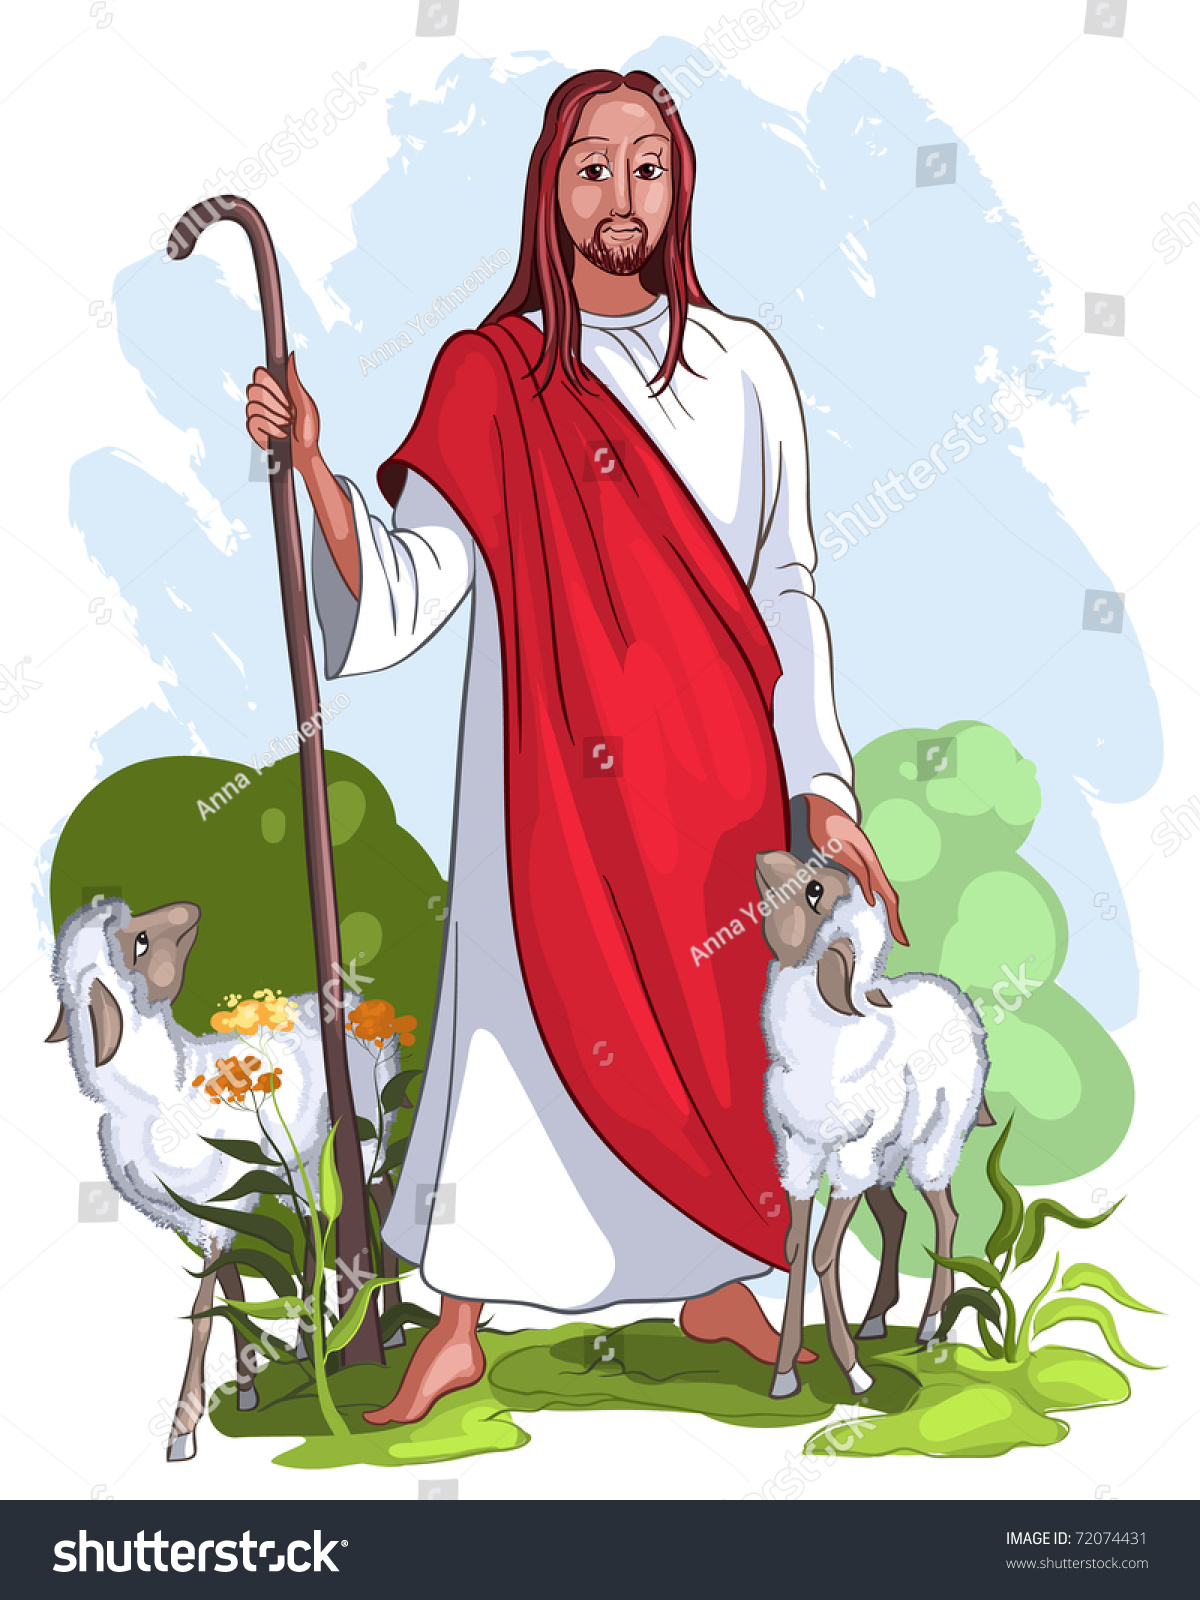 clipart jesus and bible - photo #50